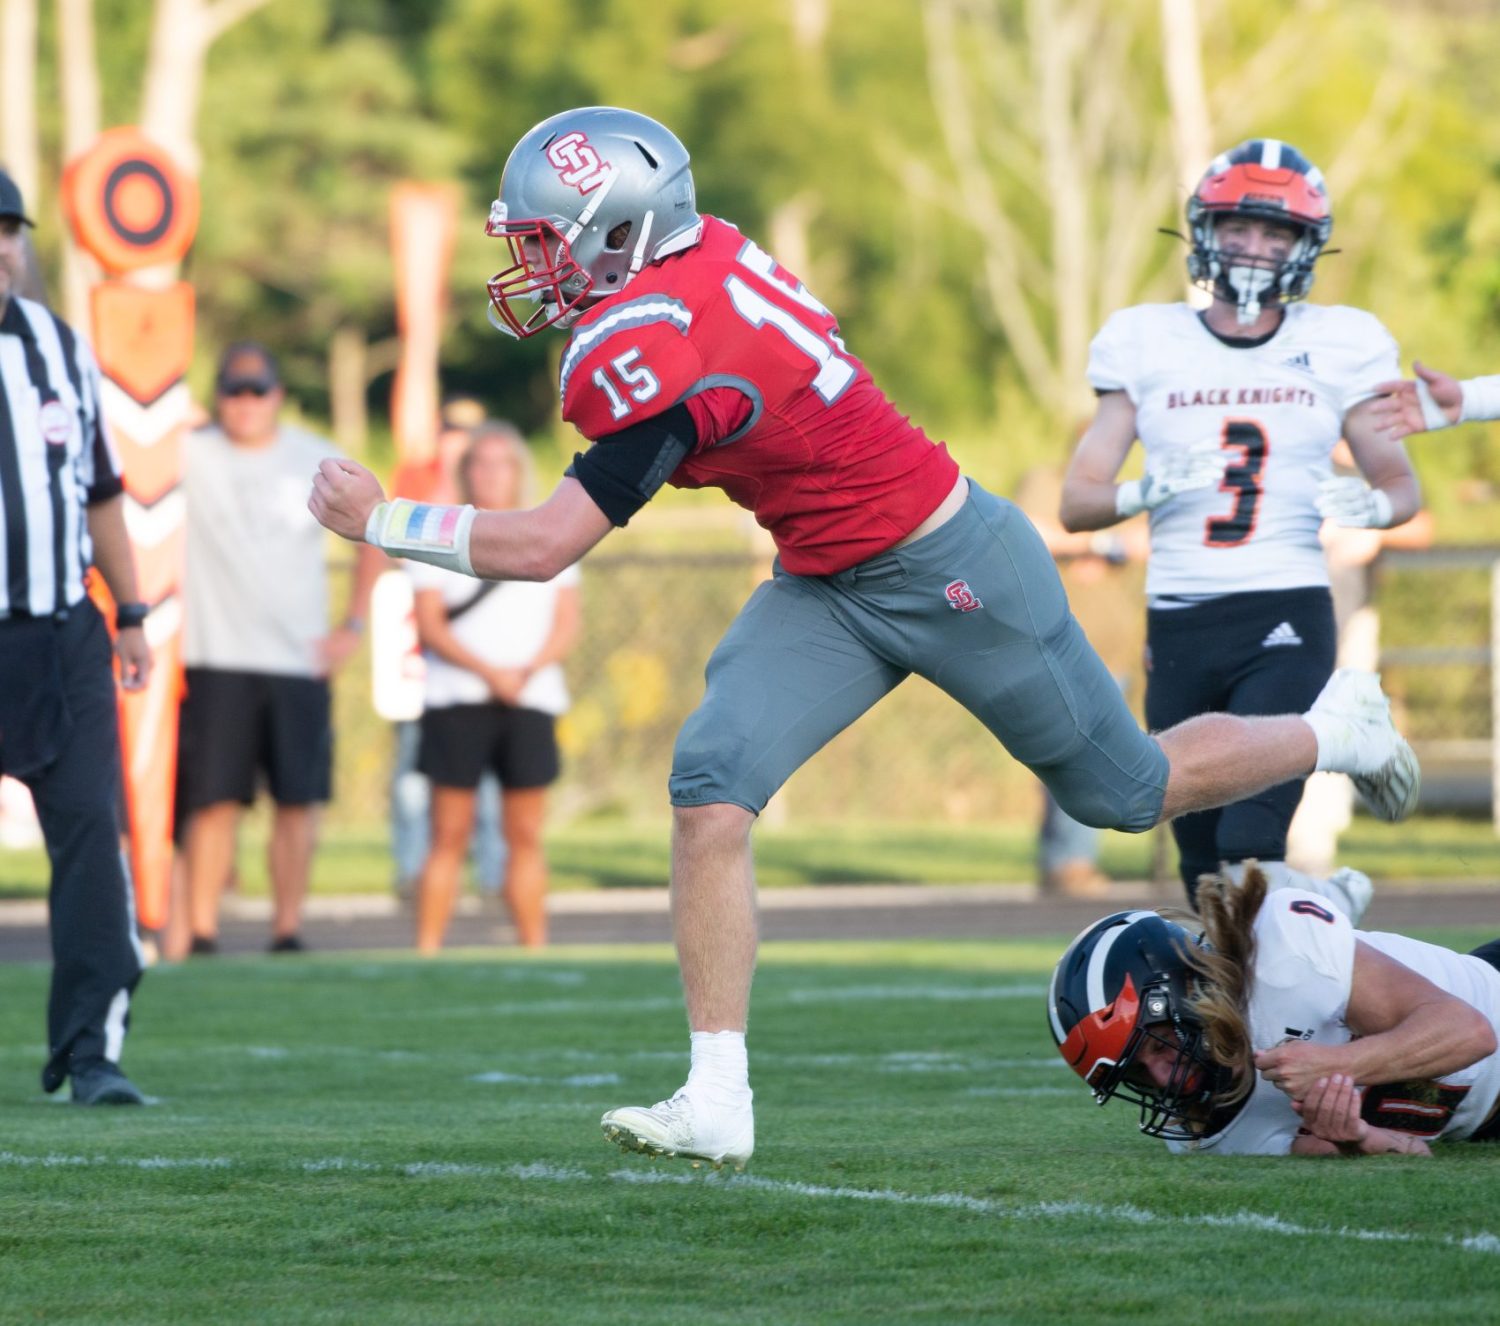 Spring Lake shows off its offensive weapons in narrow victory over Belding